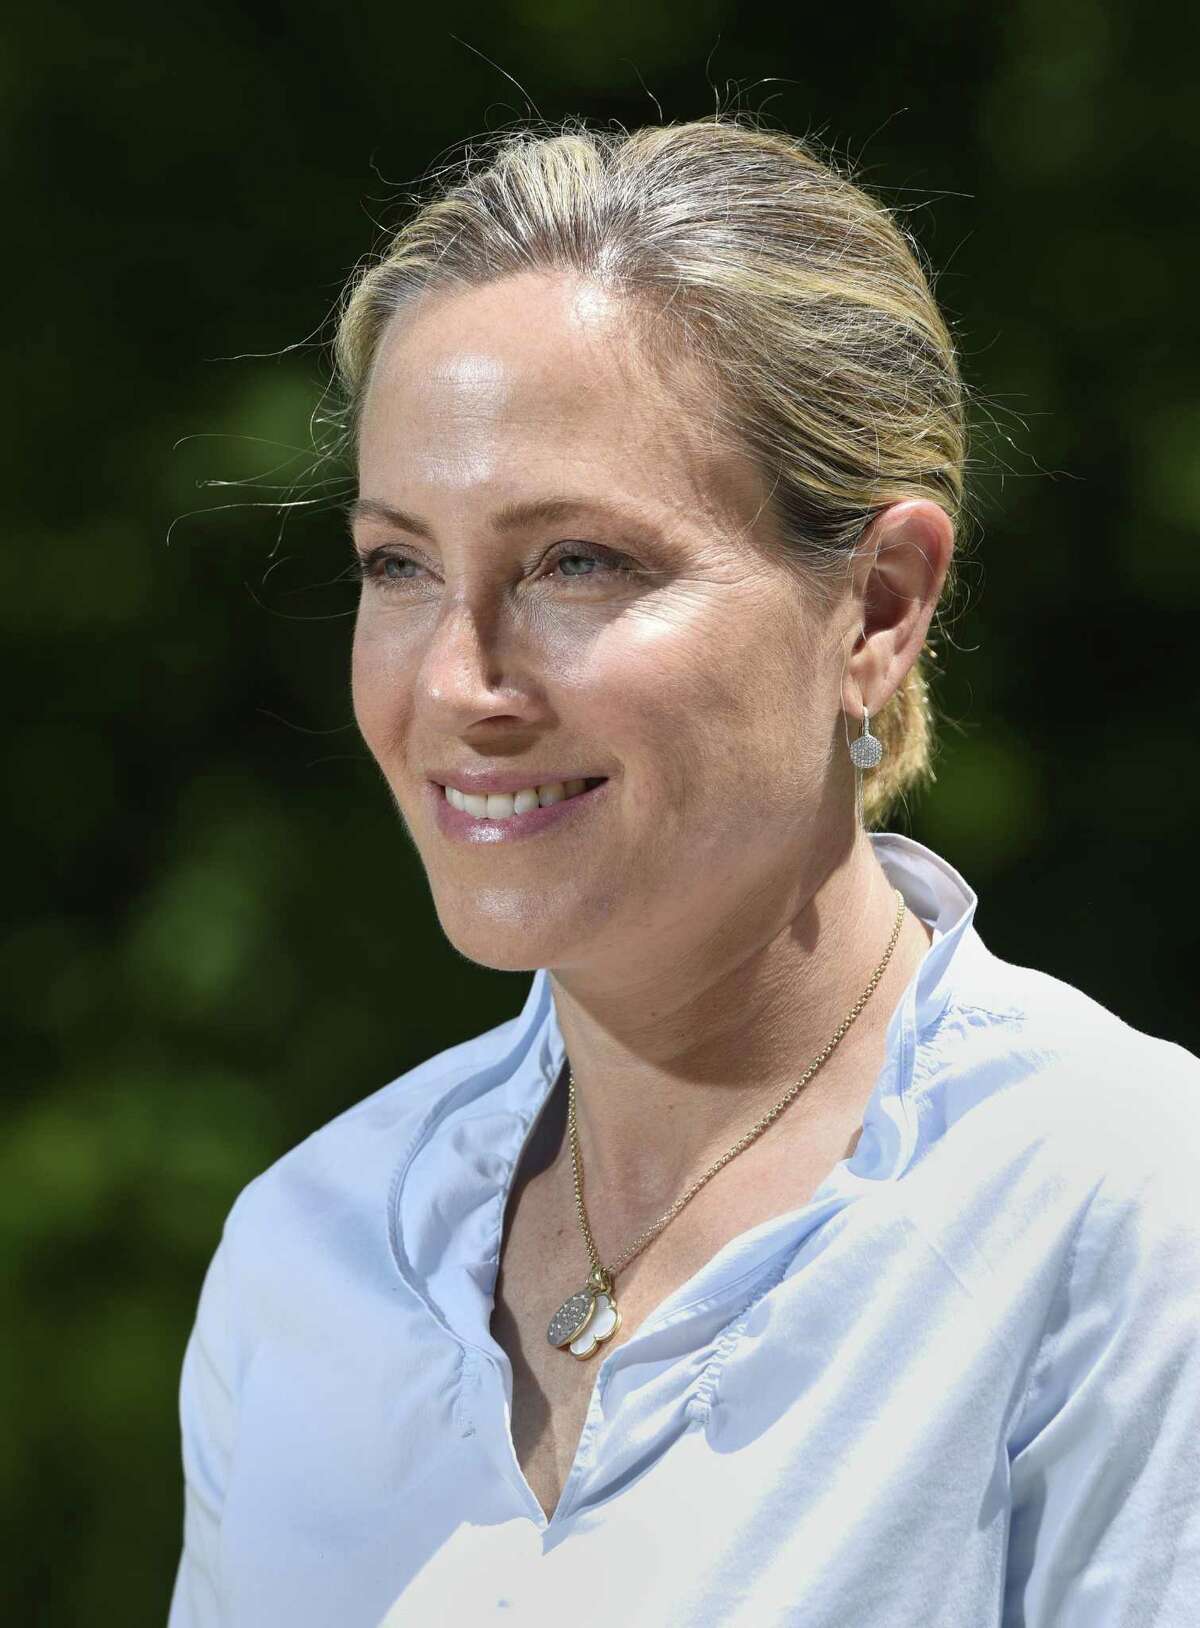 Alexandra Bergstein, the expected Democratic nominee for State Senate representing the 36th District. Bergstein is the expected nominee to face incumbent State Sen. L. Scott Frantz in the race for the 36th district that covers Greenwich as well as portions of Stamford and New Canaan.